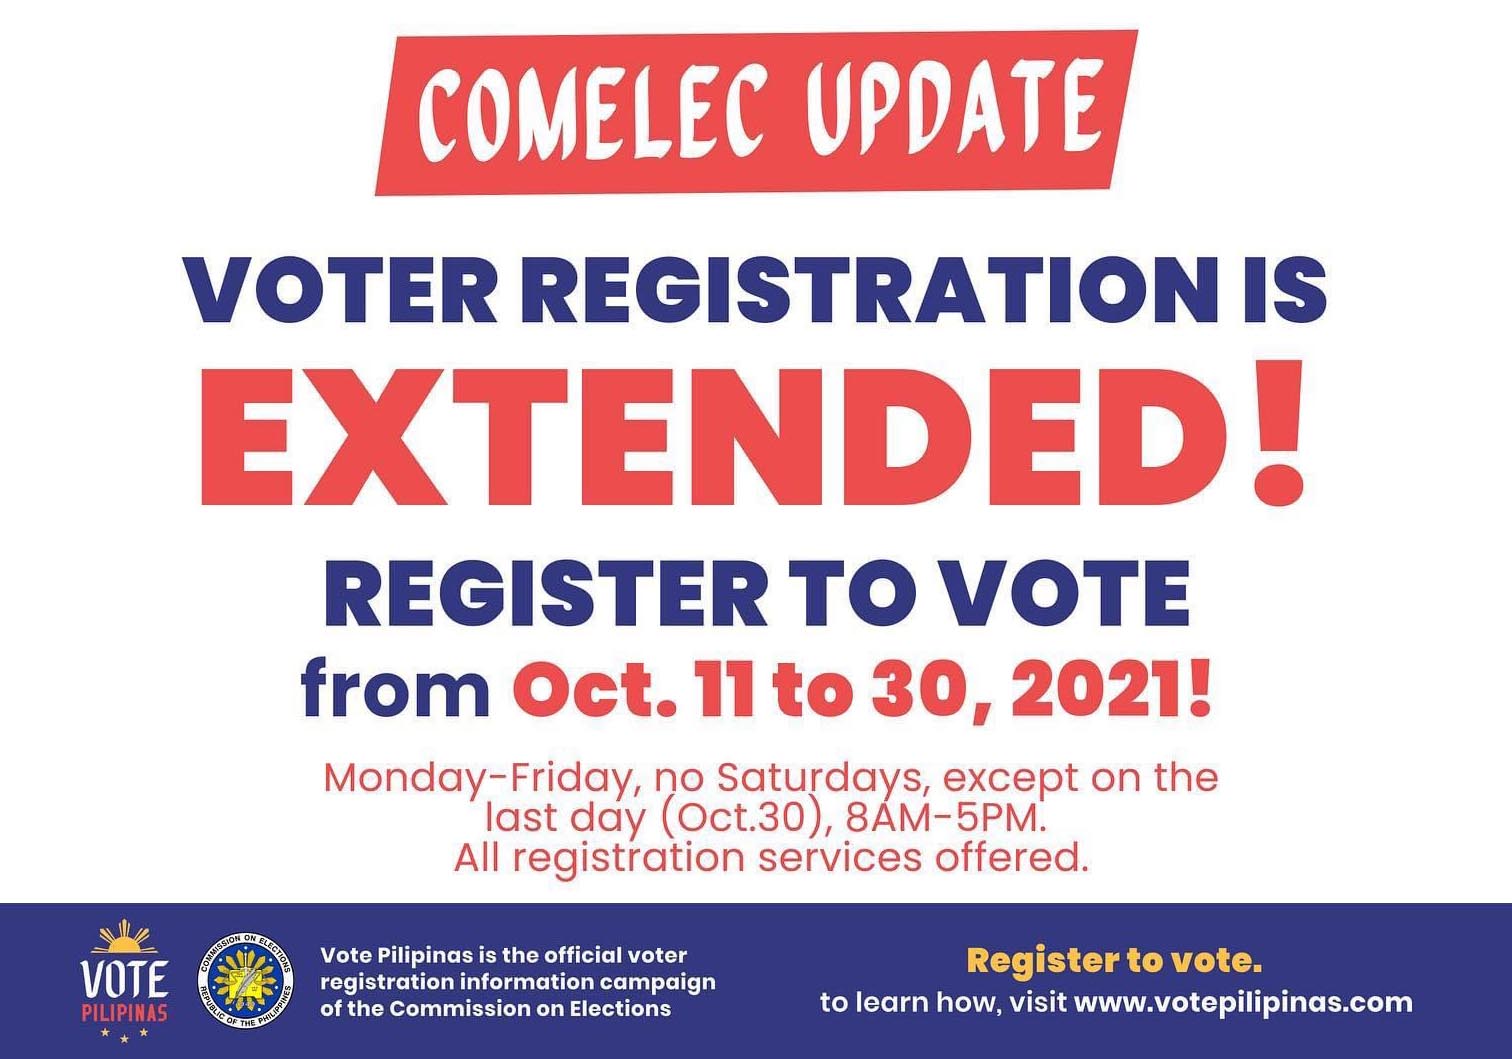 Voter registration deadline is now extended from October 11 to 30, 2021